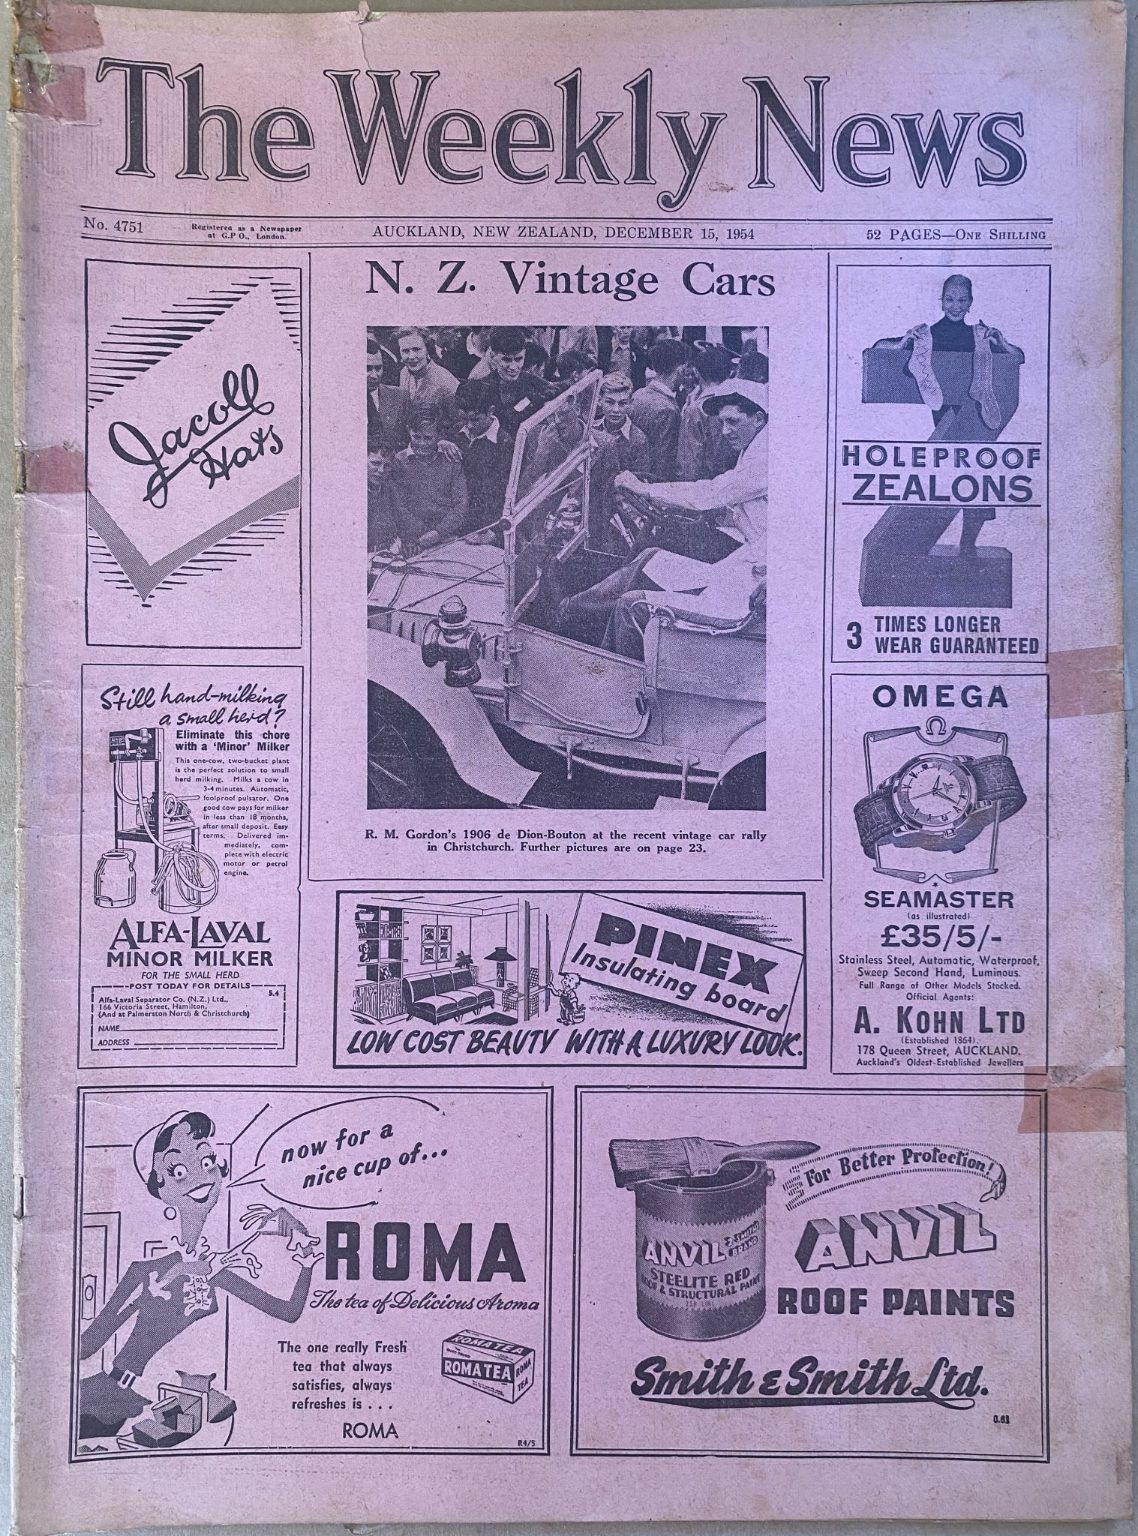 OLD NEWSPAPER: The Weekly News - No. 4751, 15 December 1954